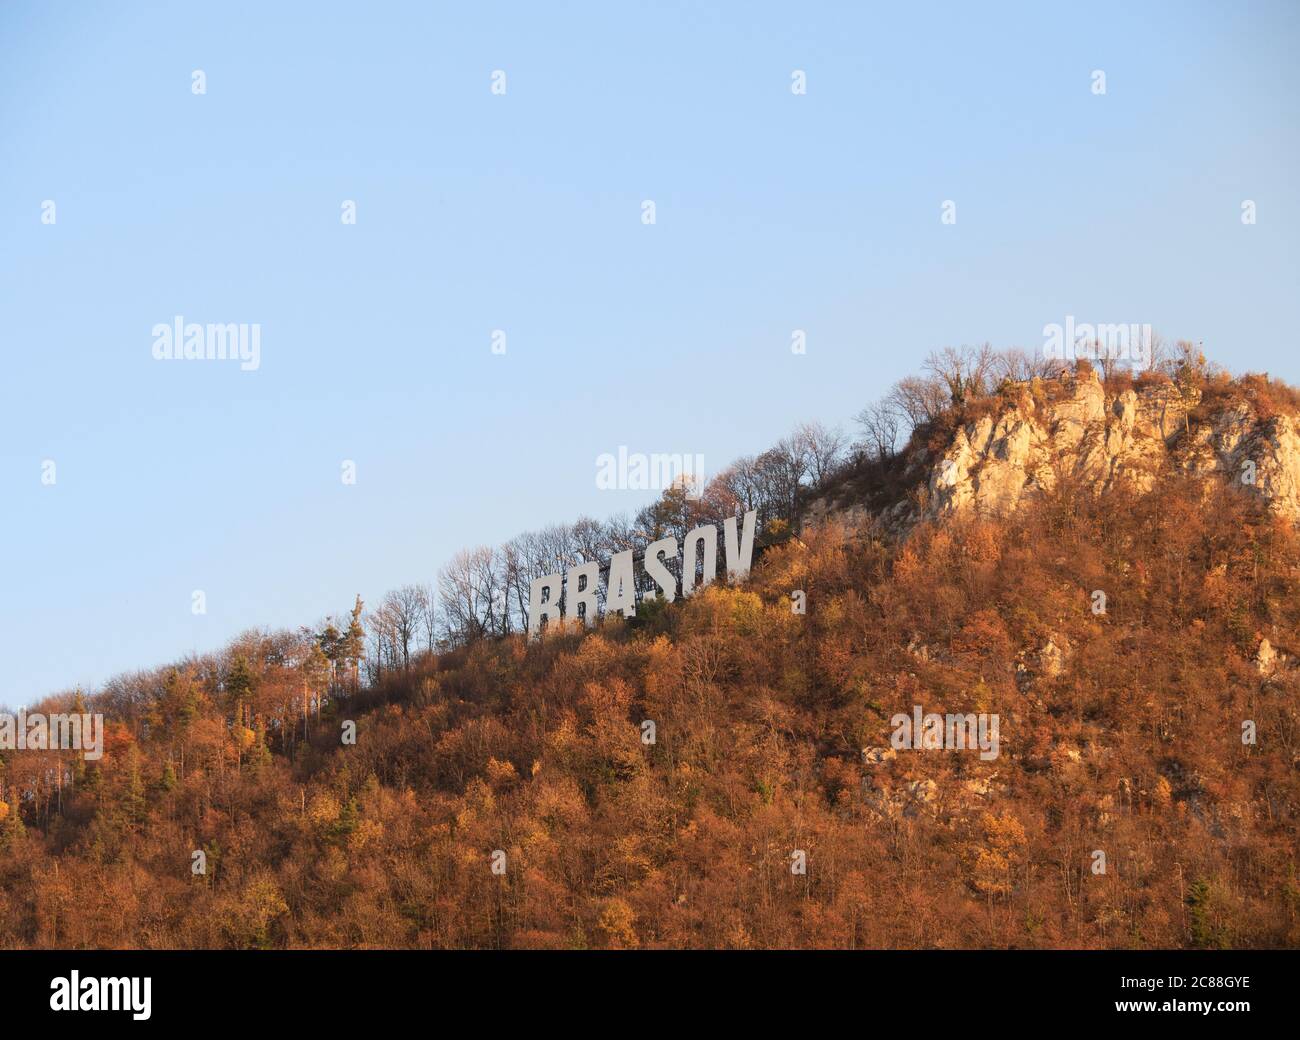 Brasov name, clearly seen on the mountain surrounded by autumn forest. Stock Photo